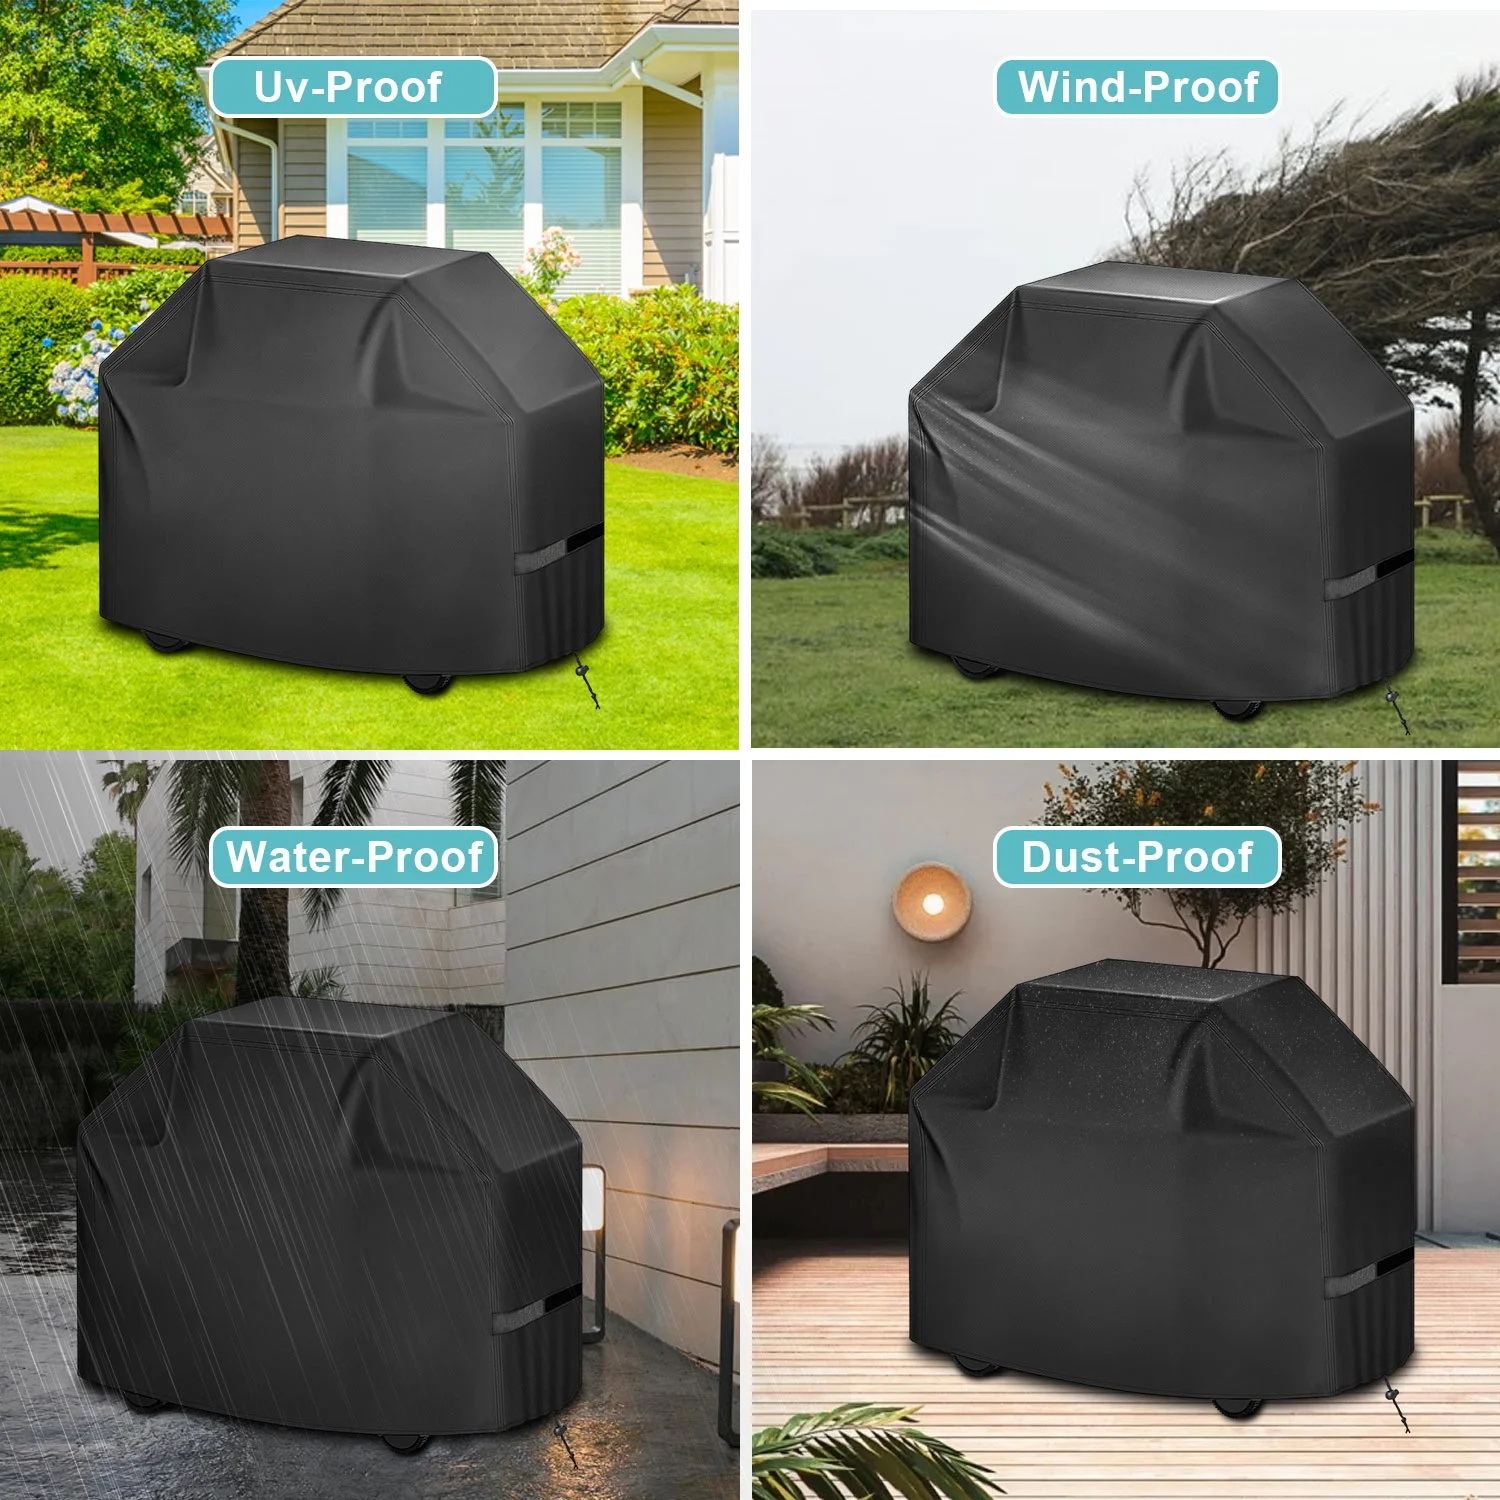 HTB BBQ Grill Cover, 58inch Weather-Resistant Grill Cover for Outdoor Grill, Waterproof Gas Grill Covers with Adjustable Drawstring, Rip-Proof Barbecue Cover for Weber Nexgrill Grills and More - image 2 of 7